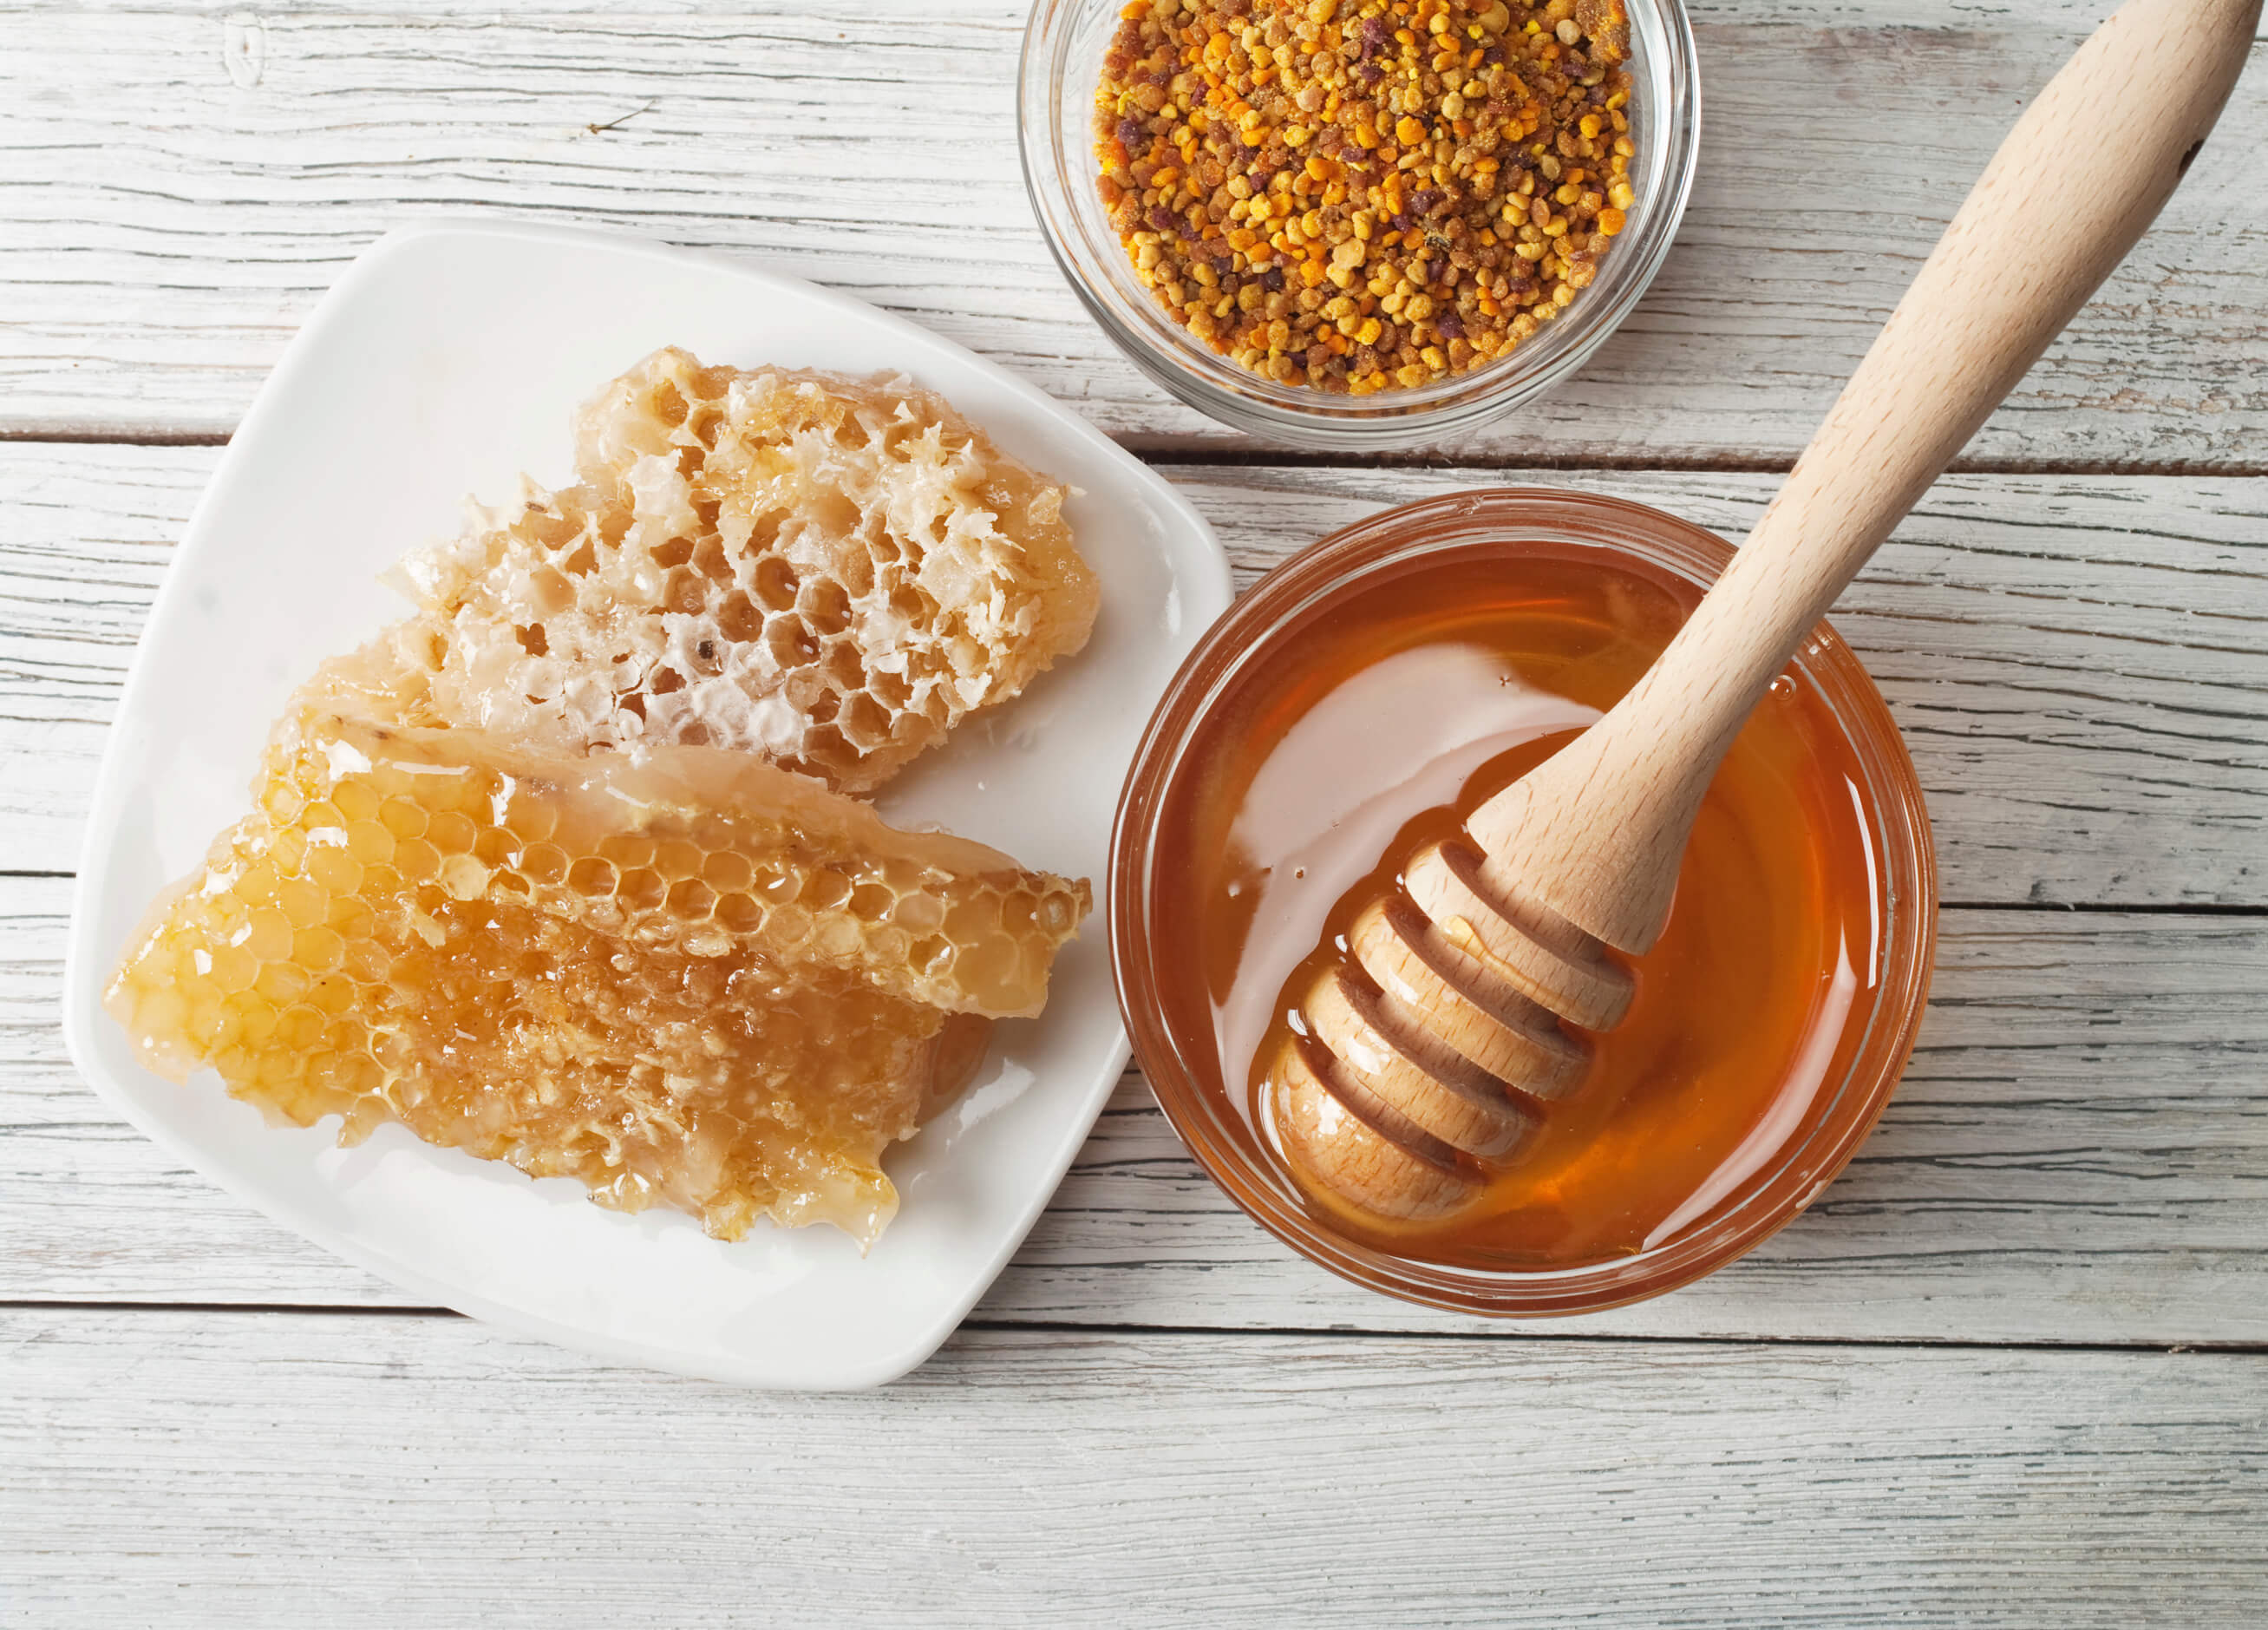 How to cook with honey